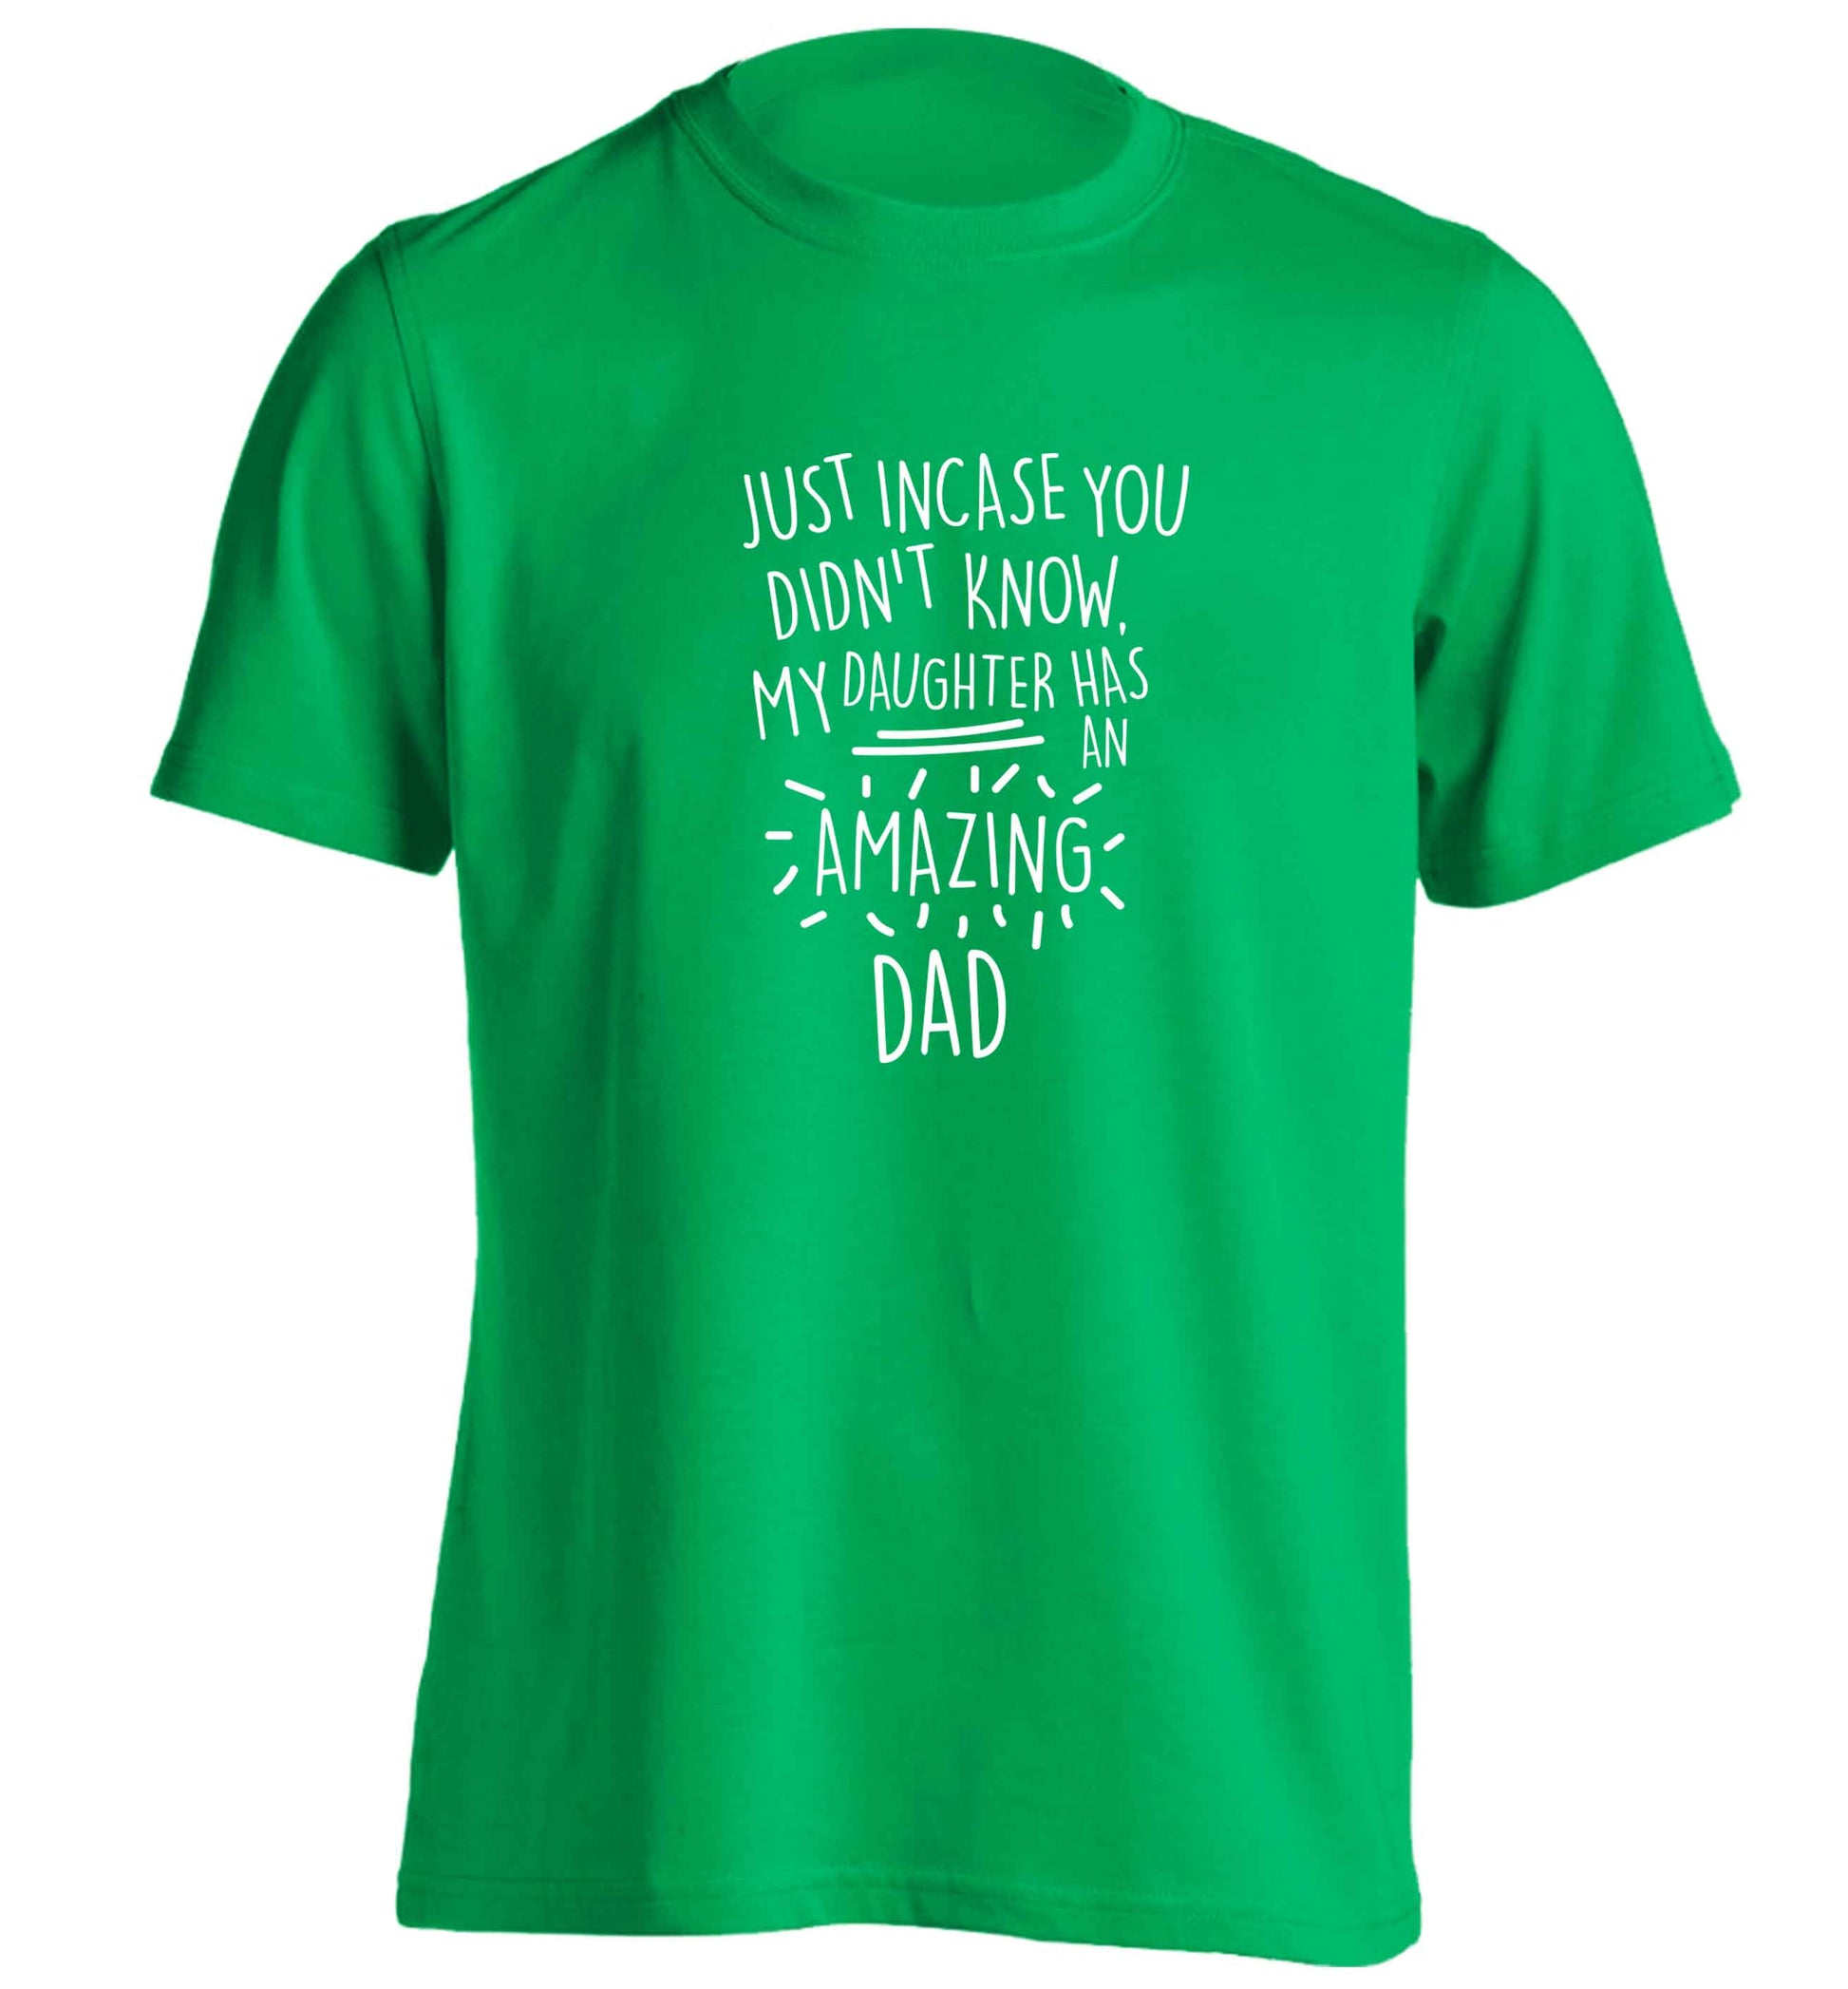 Just incase you didn't know my daughter has an amazing dad adults unisex green Tshirt 2XL